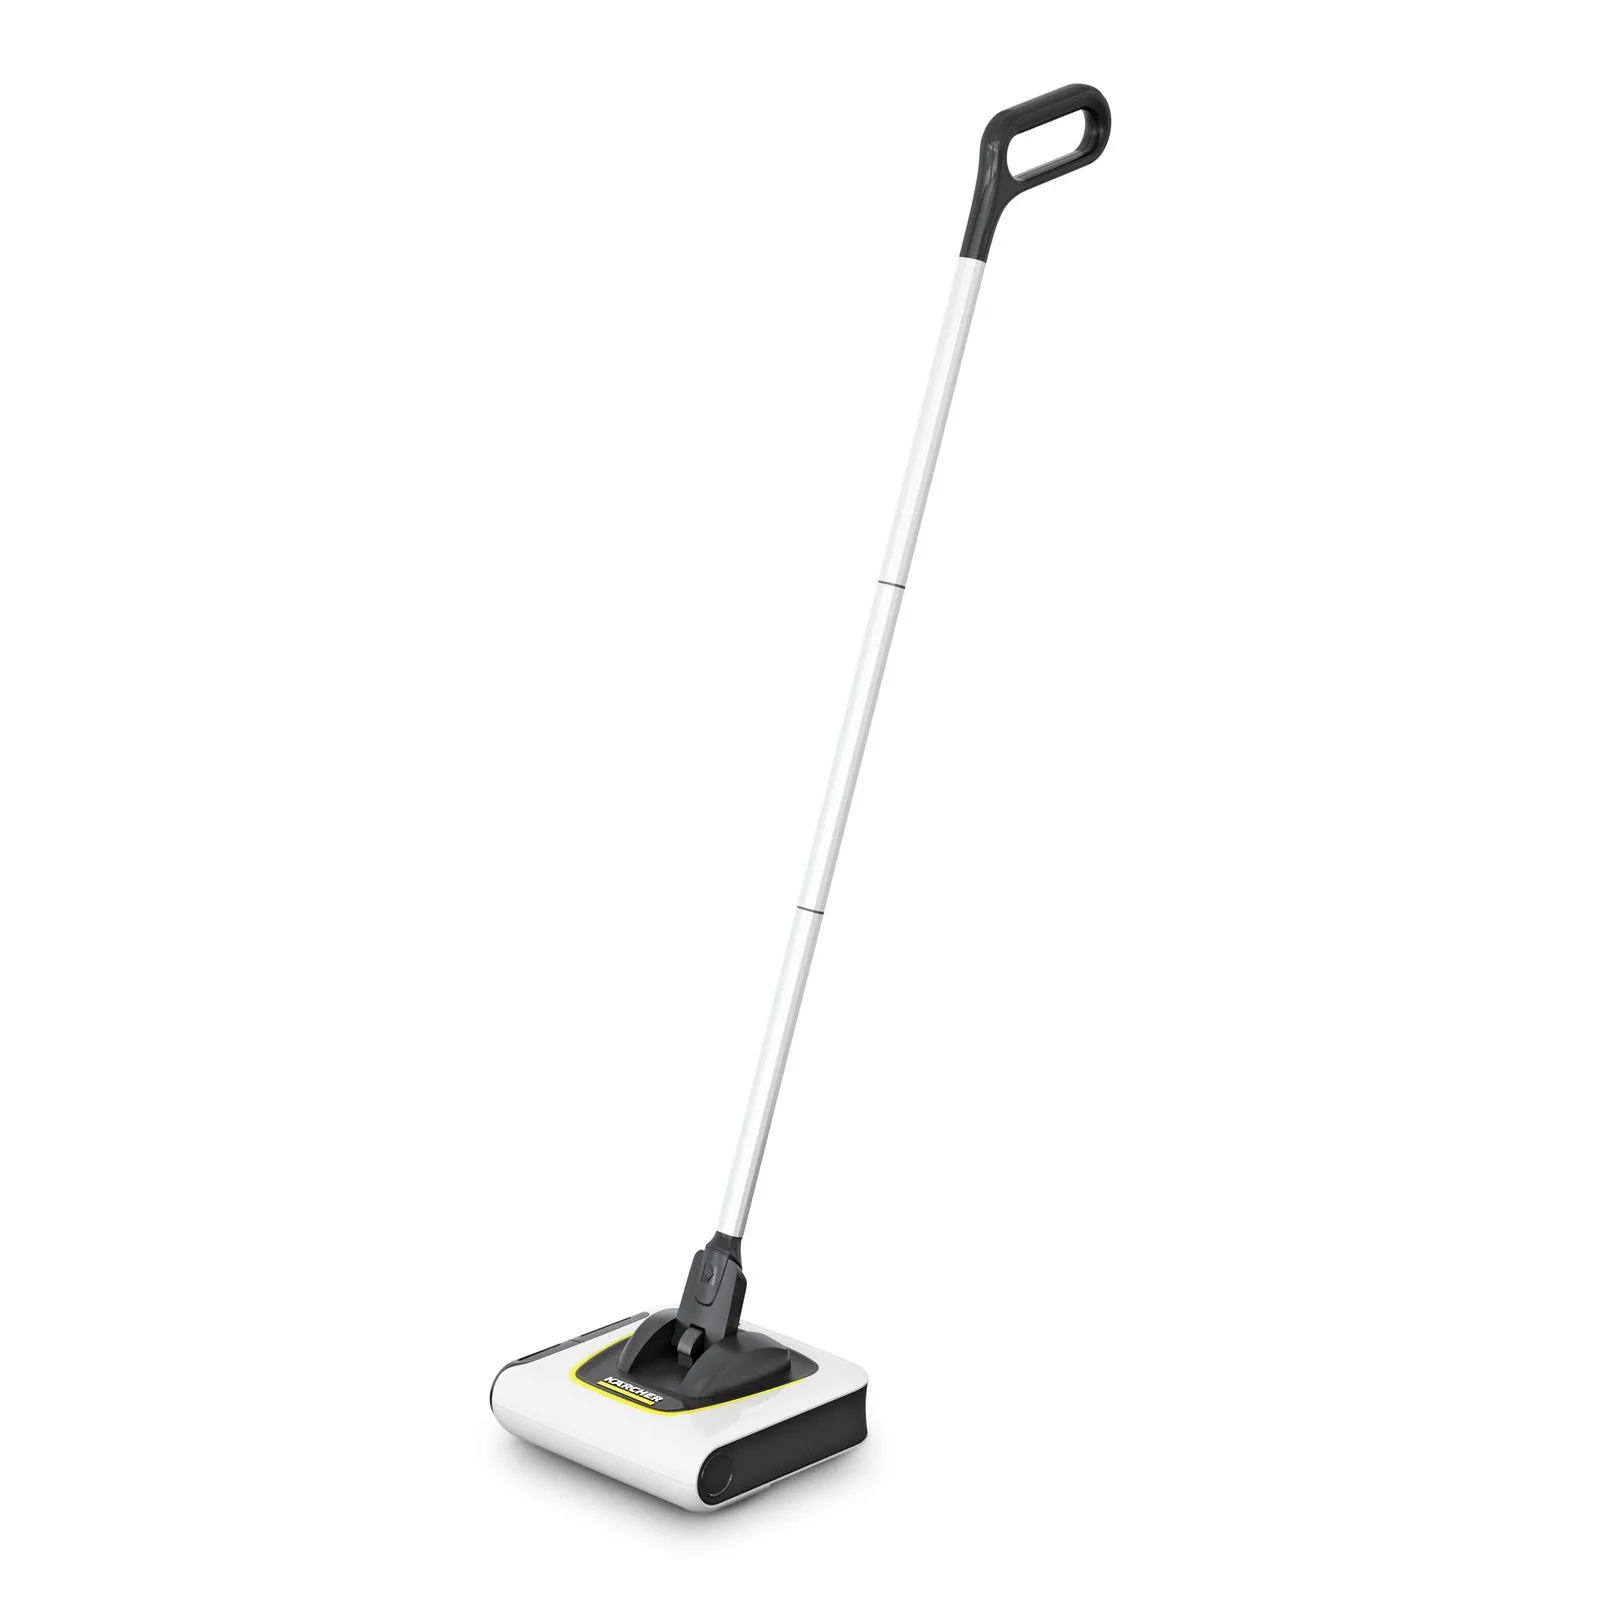 Cordless electric brooms